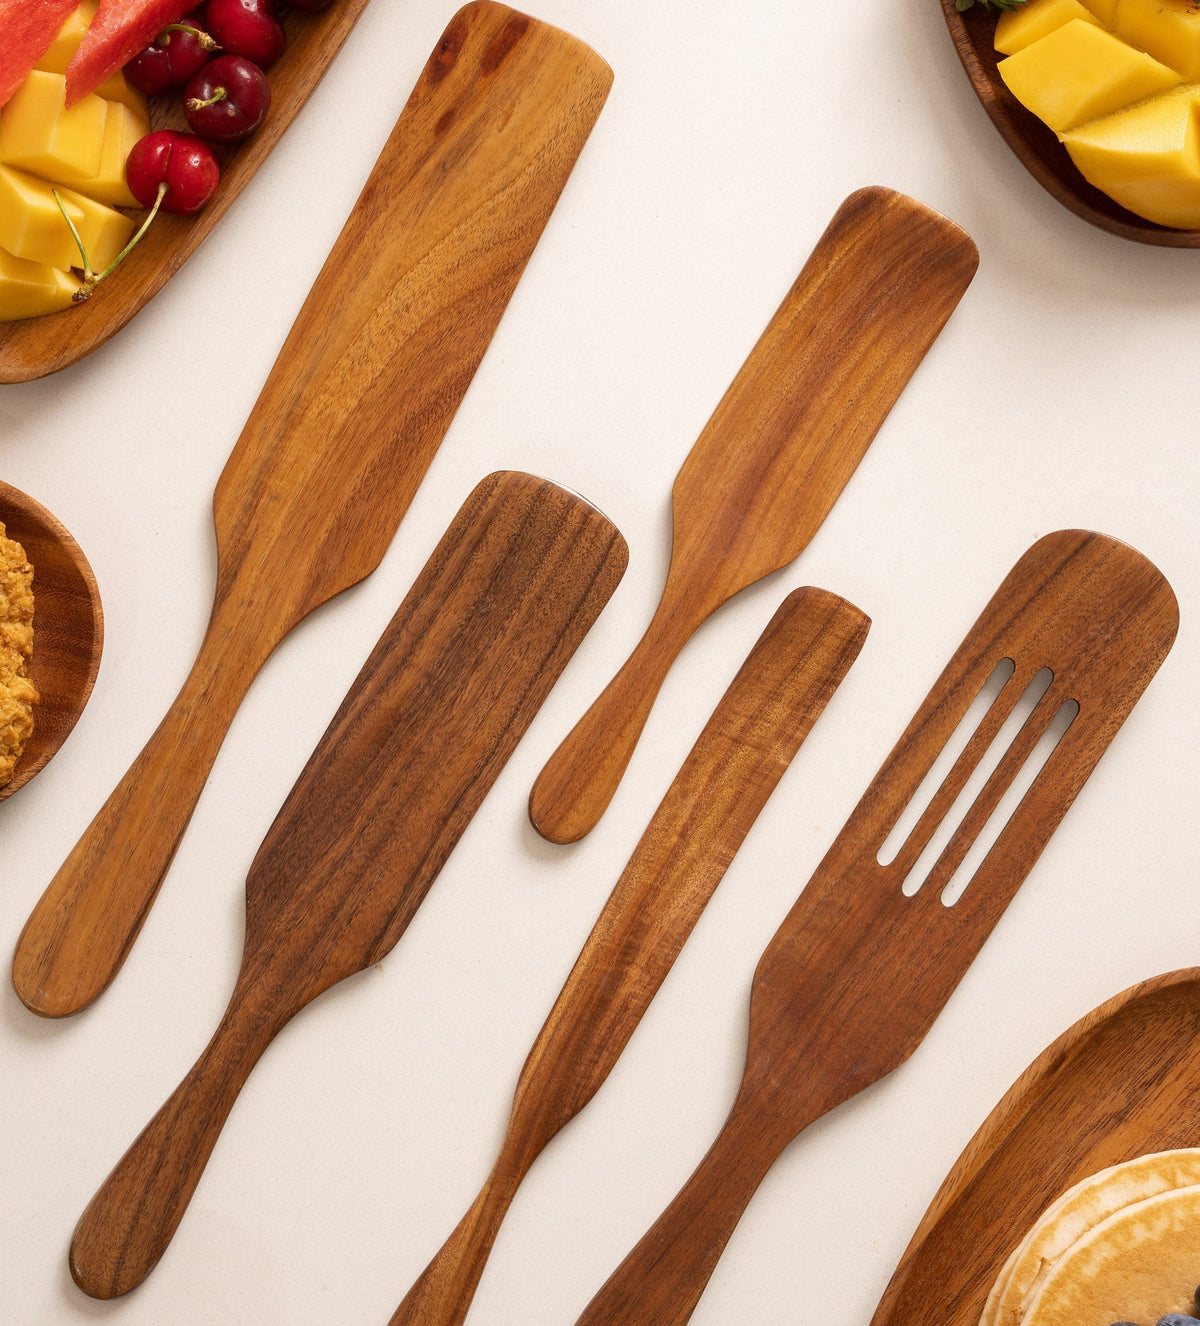 How to Care for Your Wooden Teak Utensils - Tilly Living